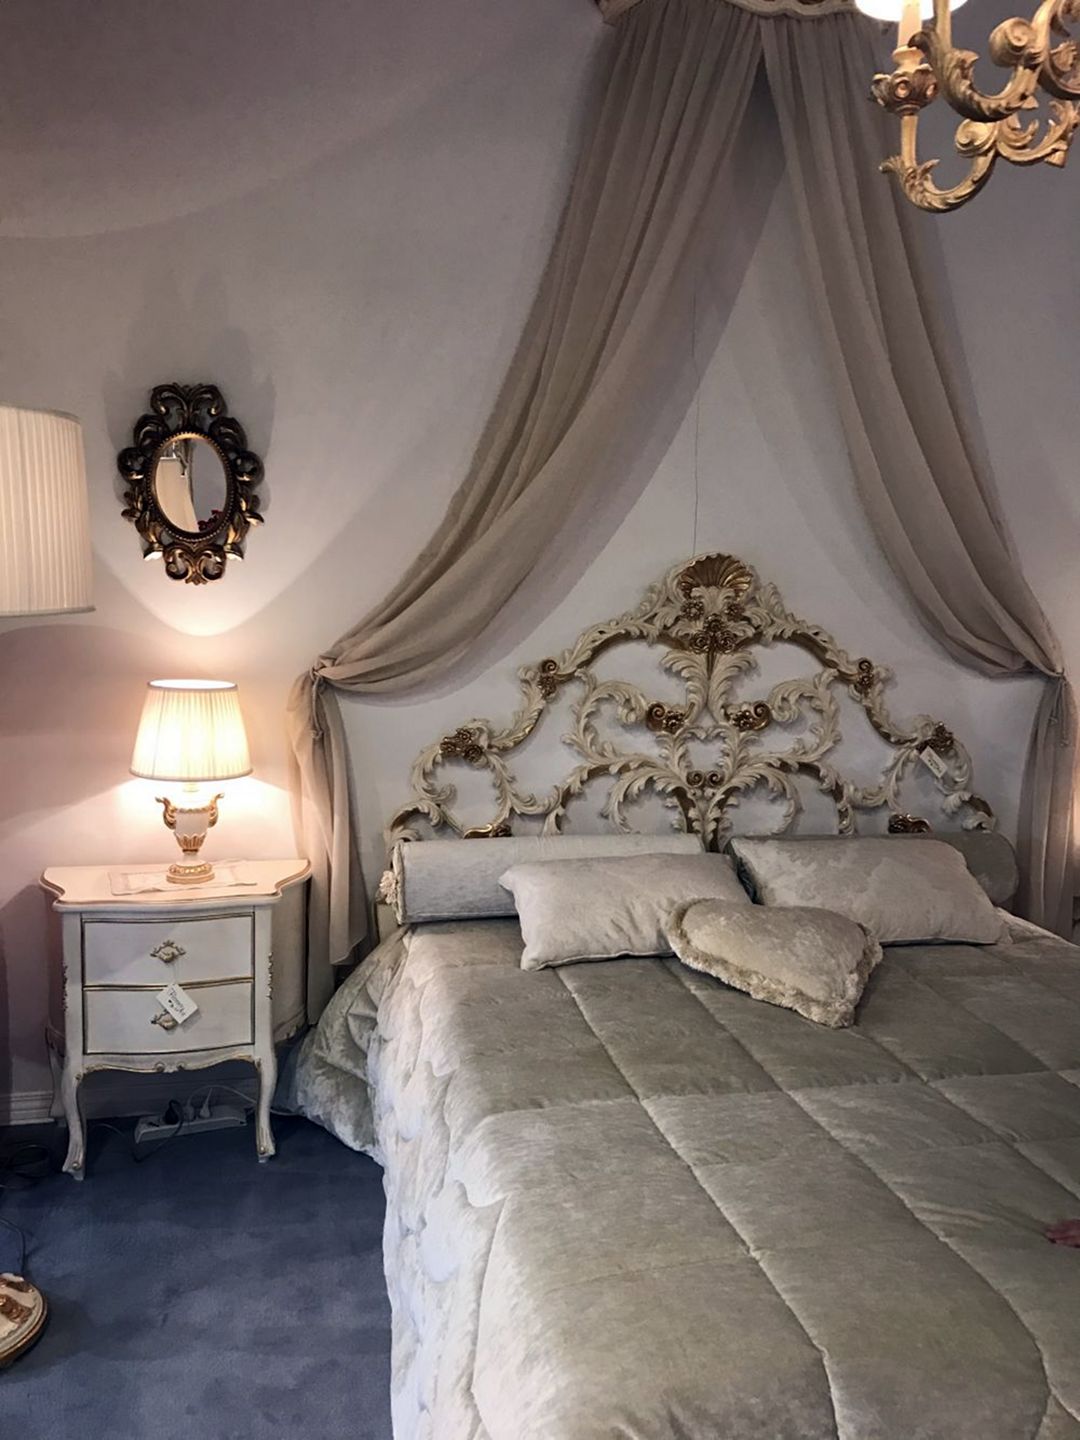 Decorating A Bedroom With A Baroque Style From Homedit